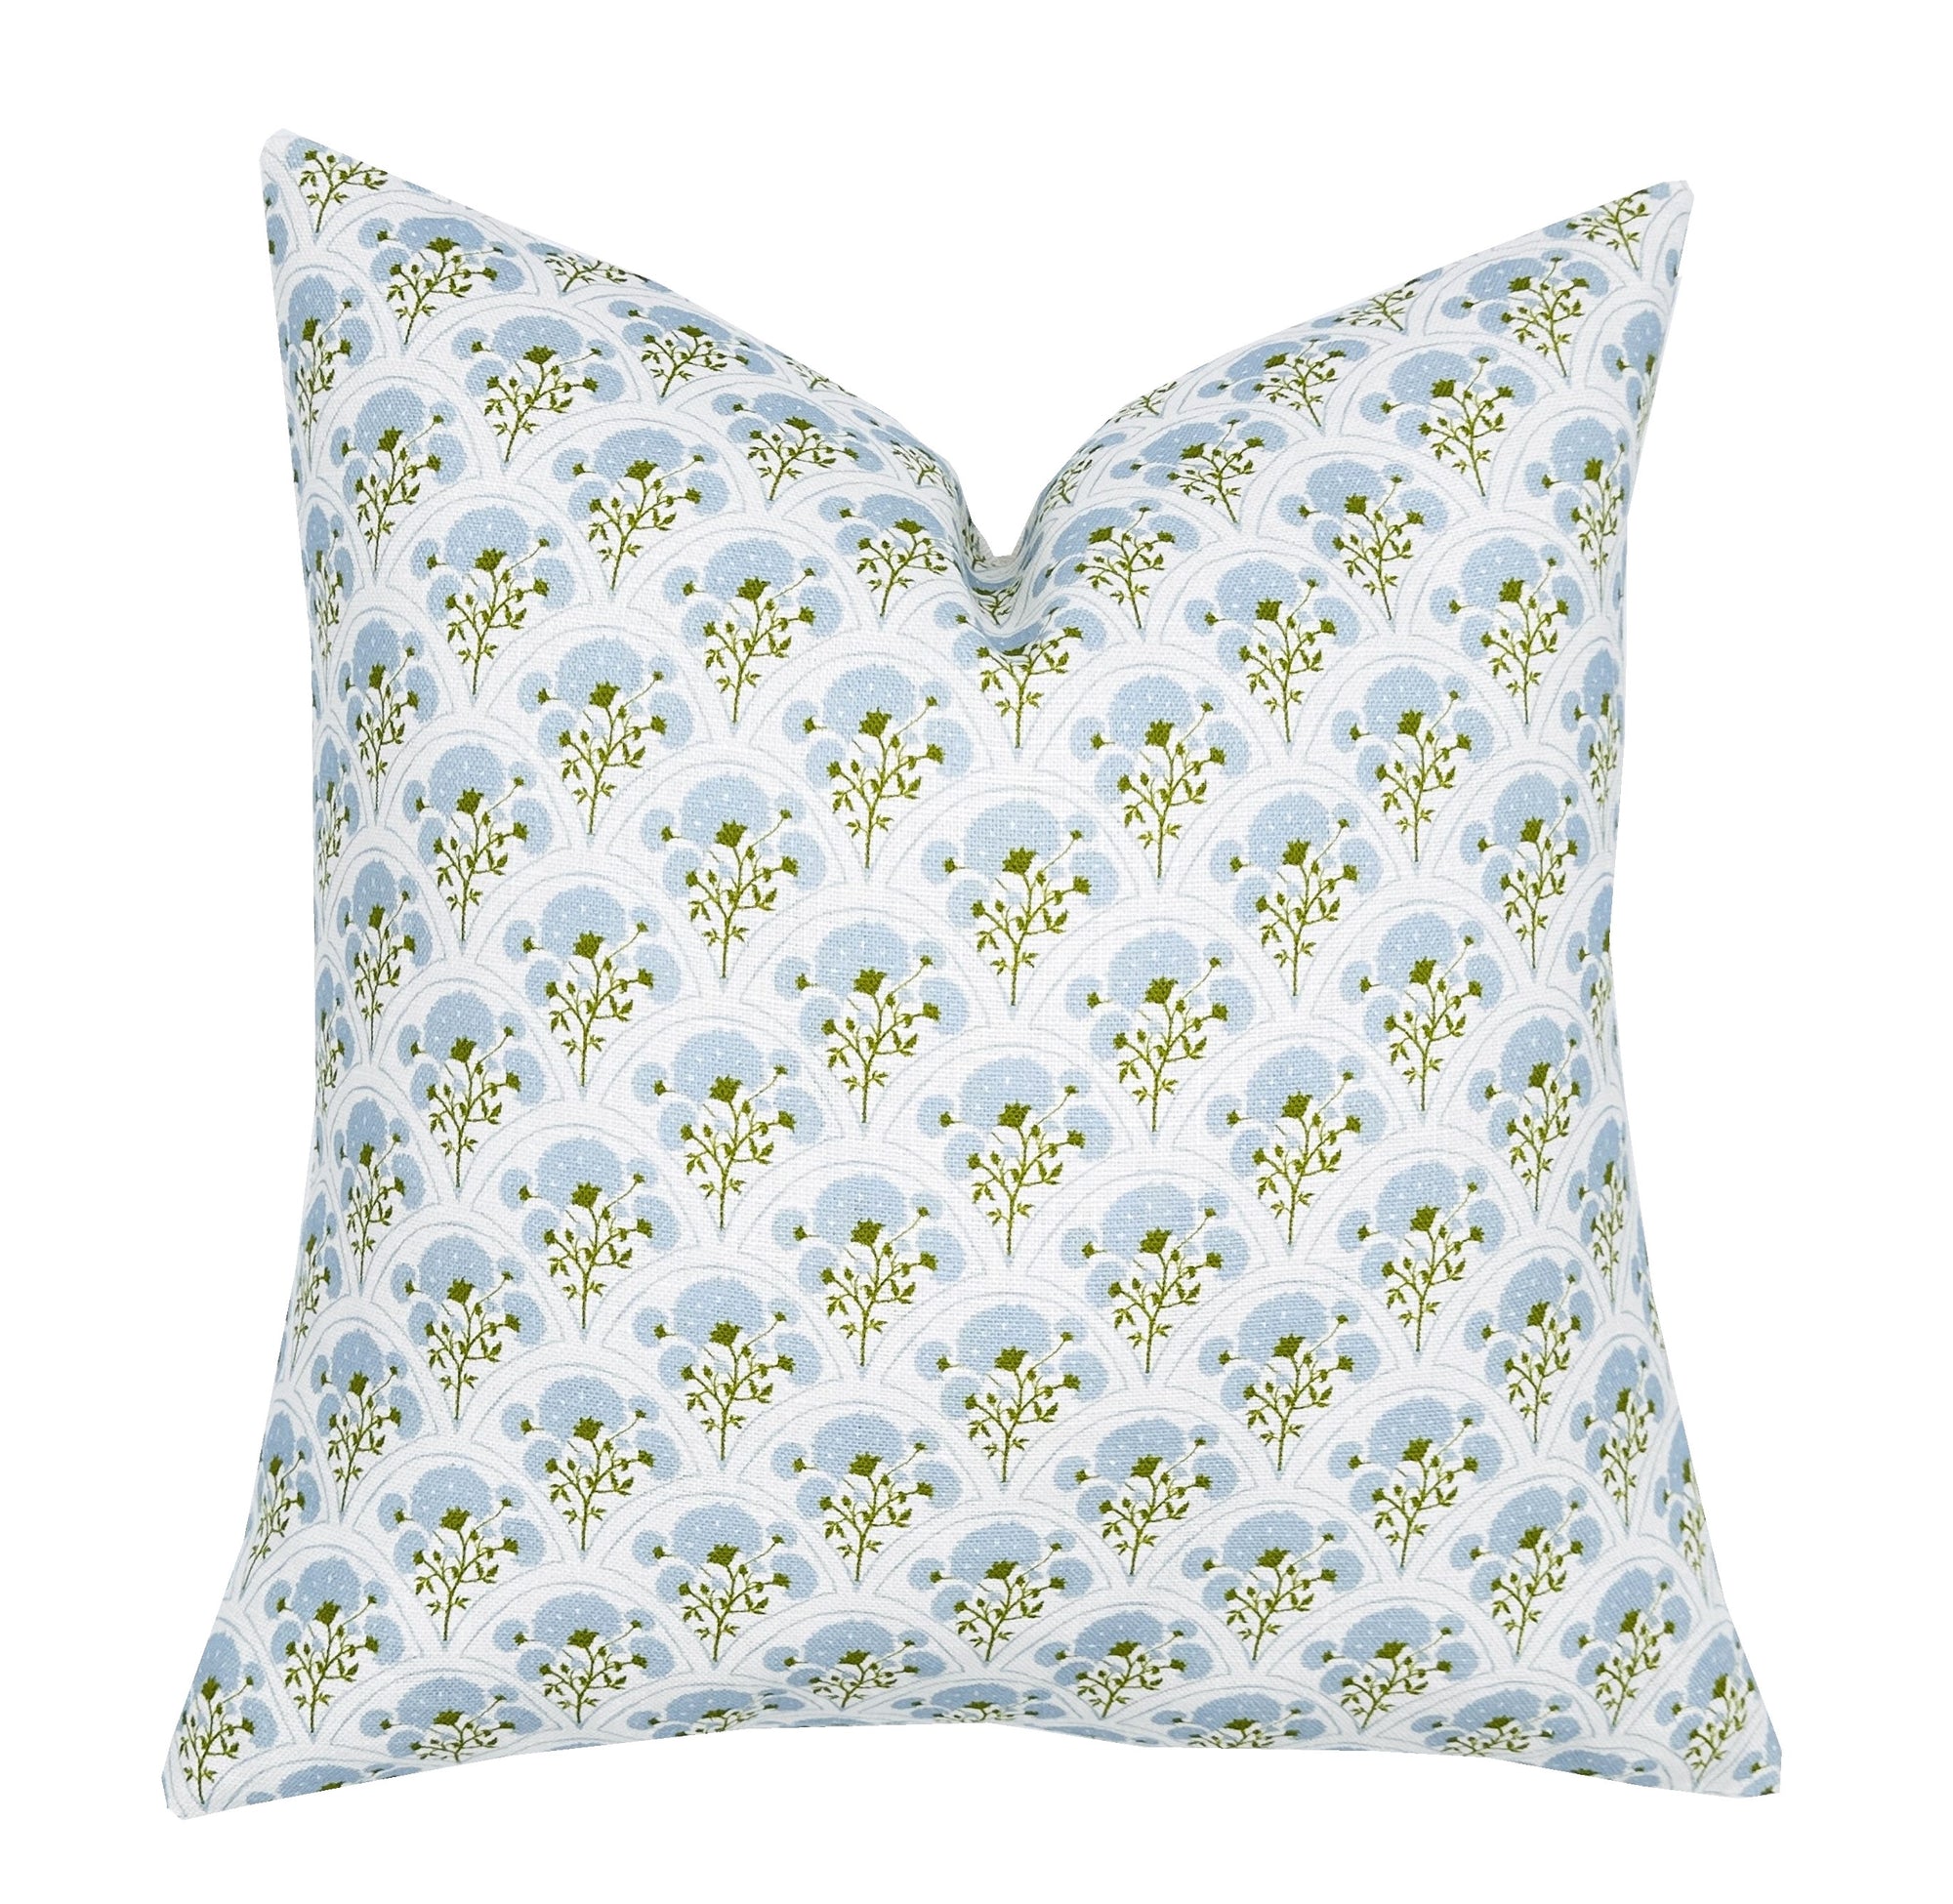 Designer Marigold Sky Pillow Cover | High End | Soft Blue and Green Floral